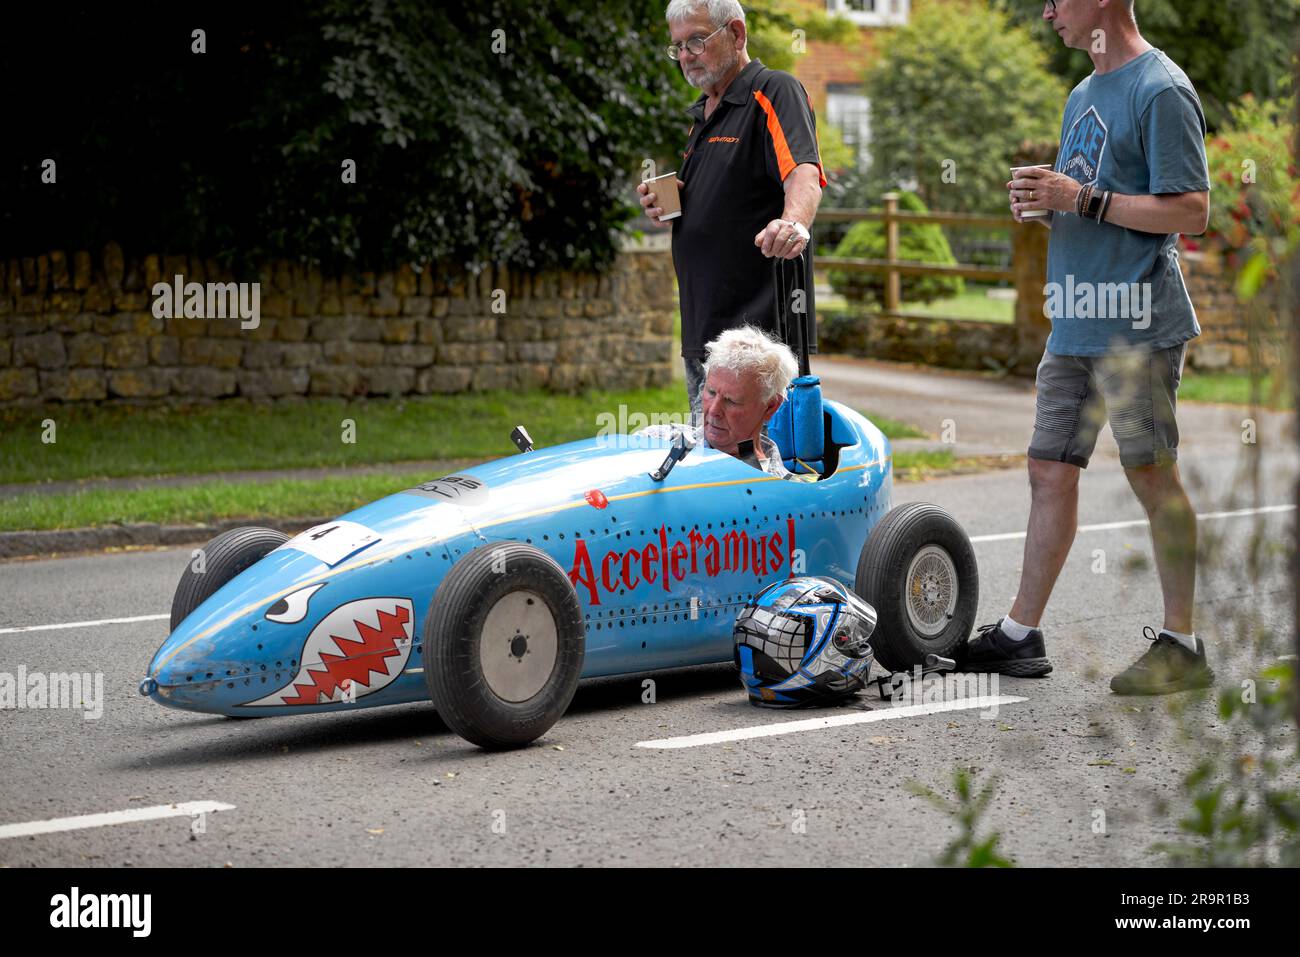 Soapbox Derby with senior competitor preparing to race, England UK Stock Photo